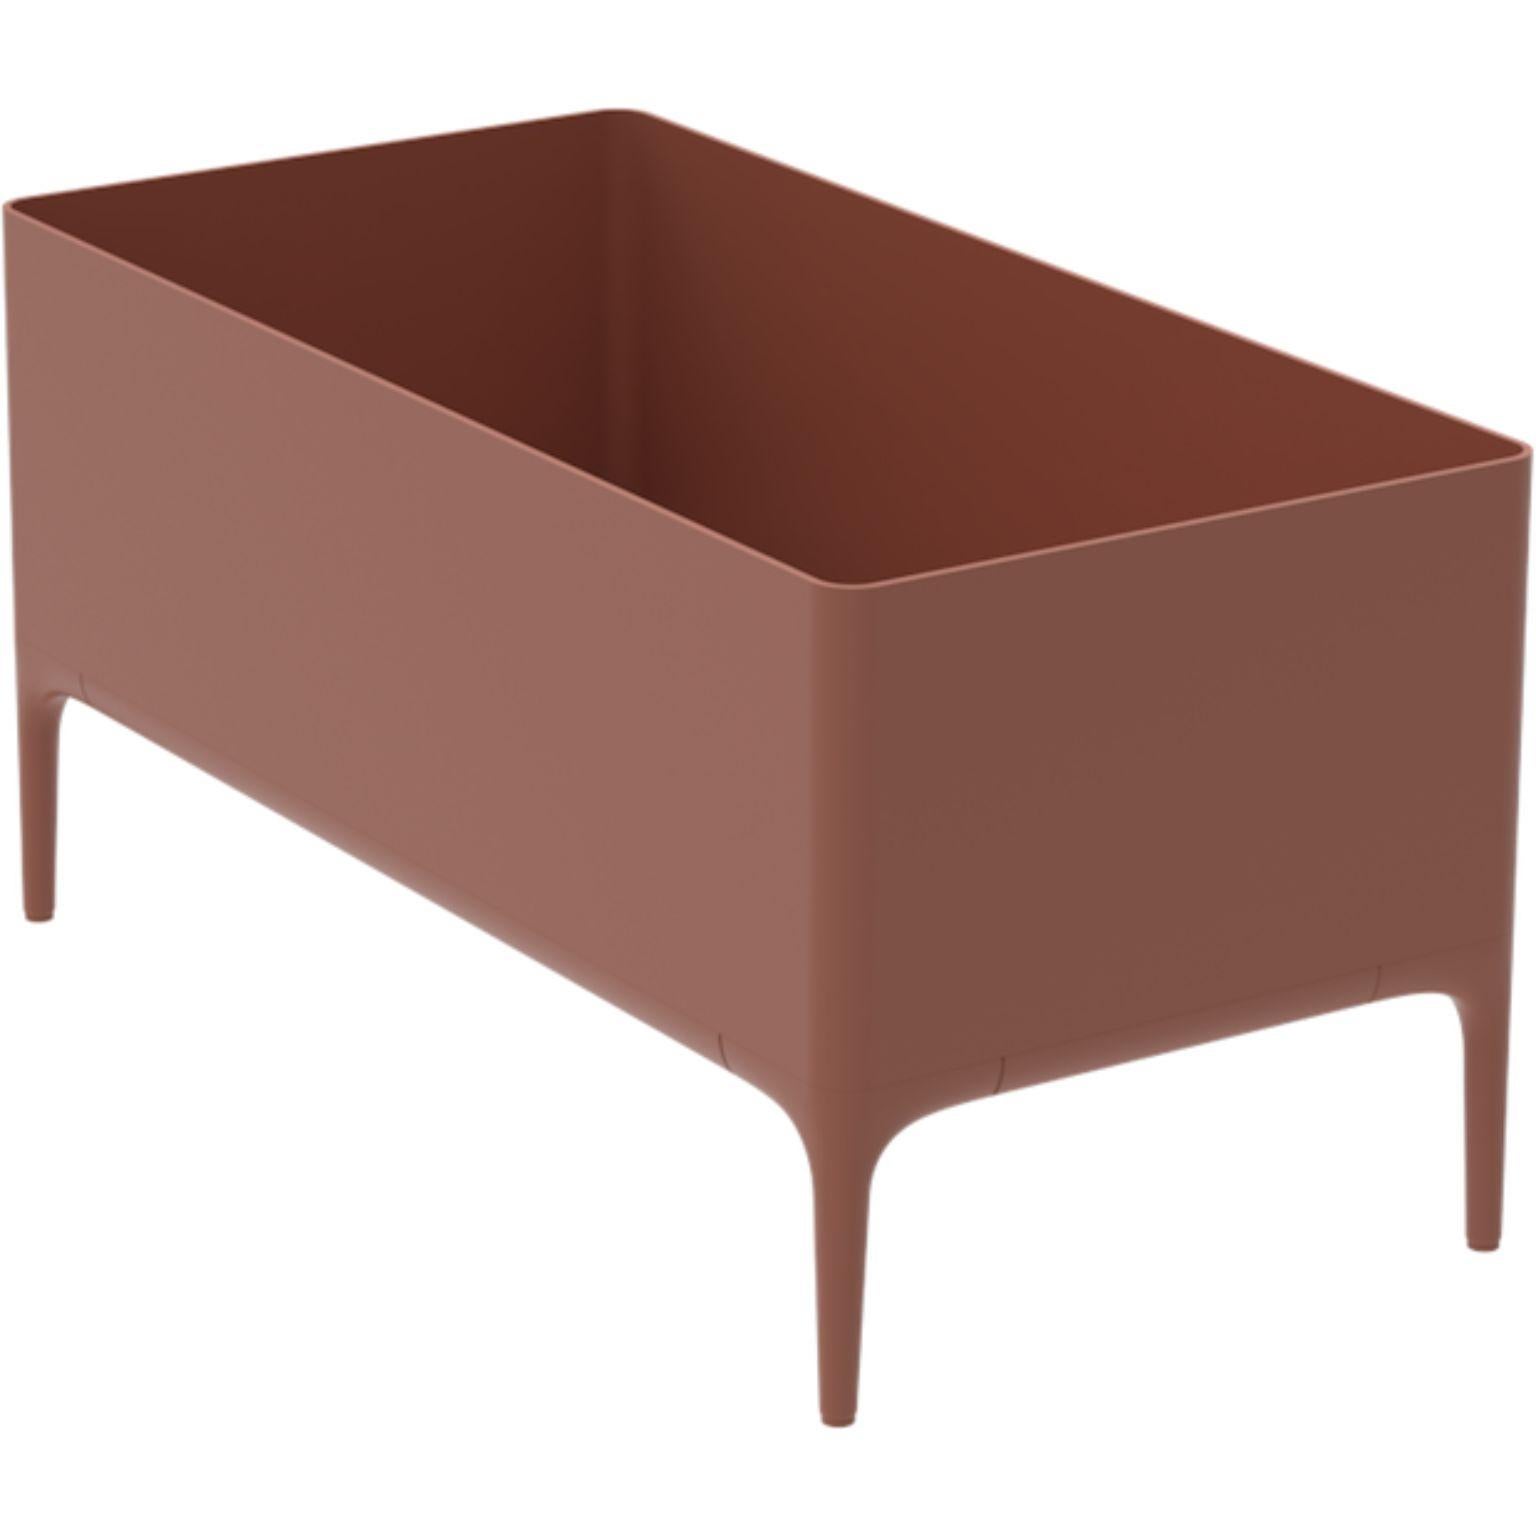 Xaloc Salmon Planter by MOWEE
Dimensions: D90 x W45 x H45 cm
Material: Aluminium
Weight: 11 kg
Also Available in different colours and finishes.

 Xaloc synthesizes the lines of interior furniture to extrapolate to the exterior, creating an